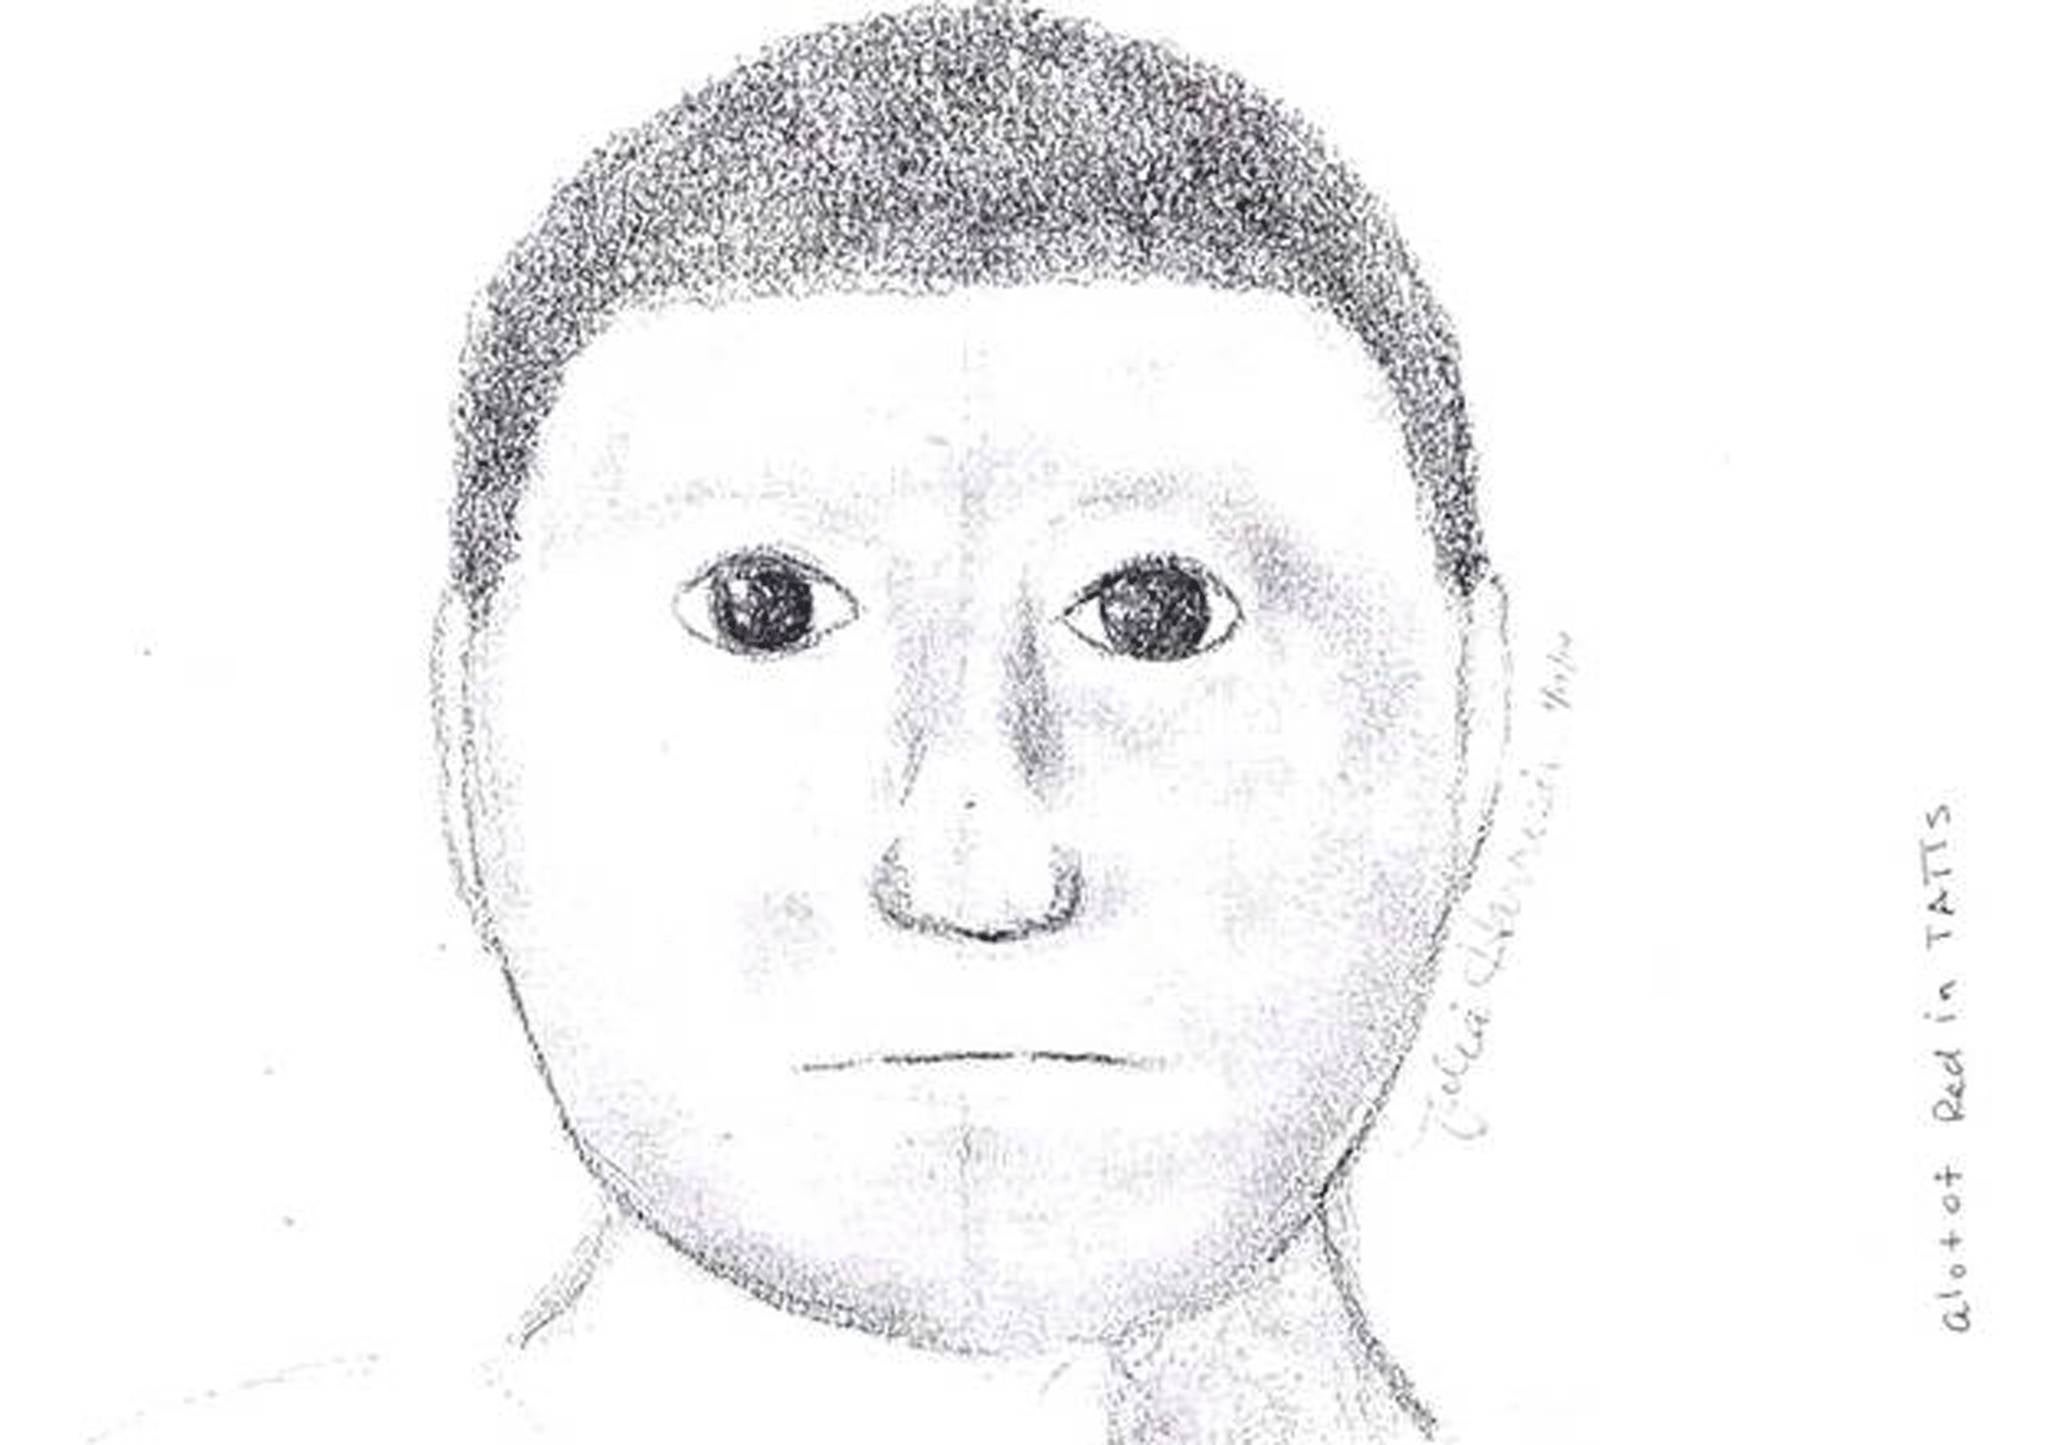 The Lamar County Sheriff's Department sketch